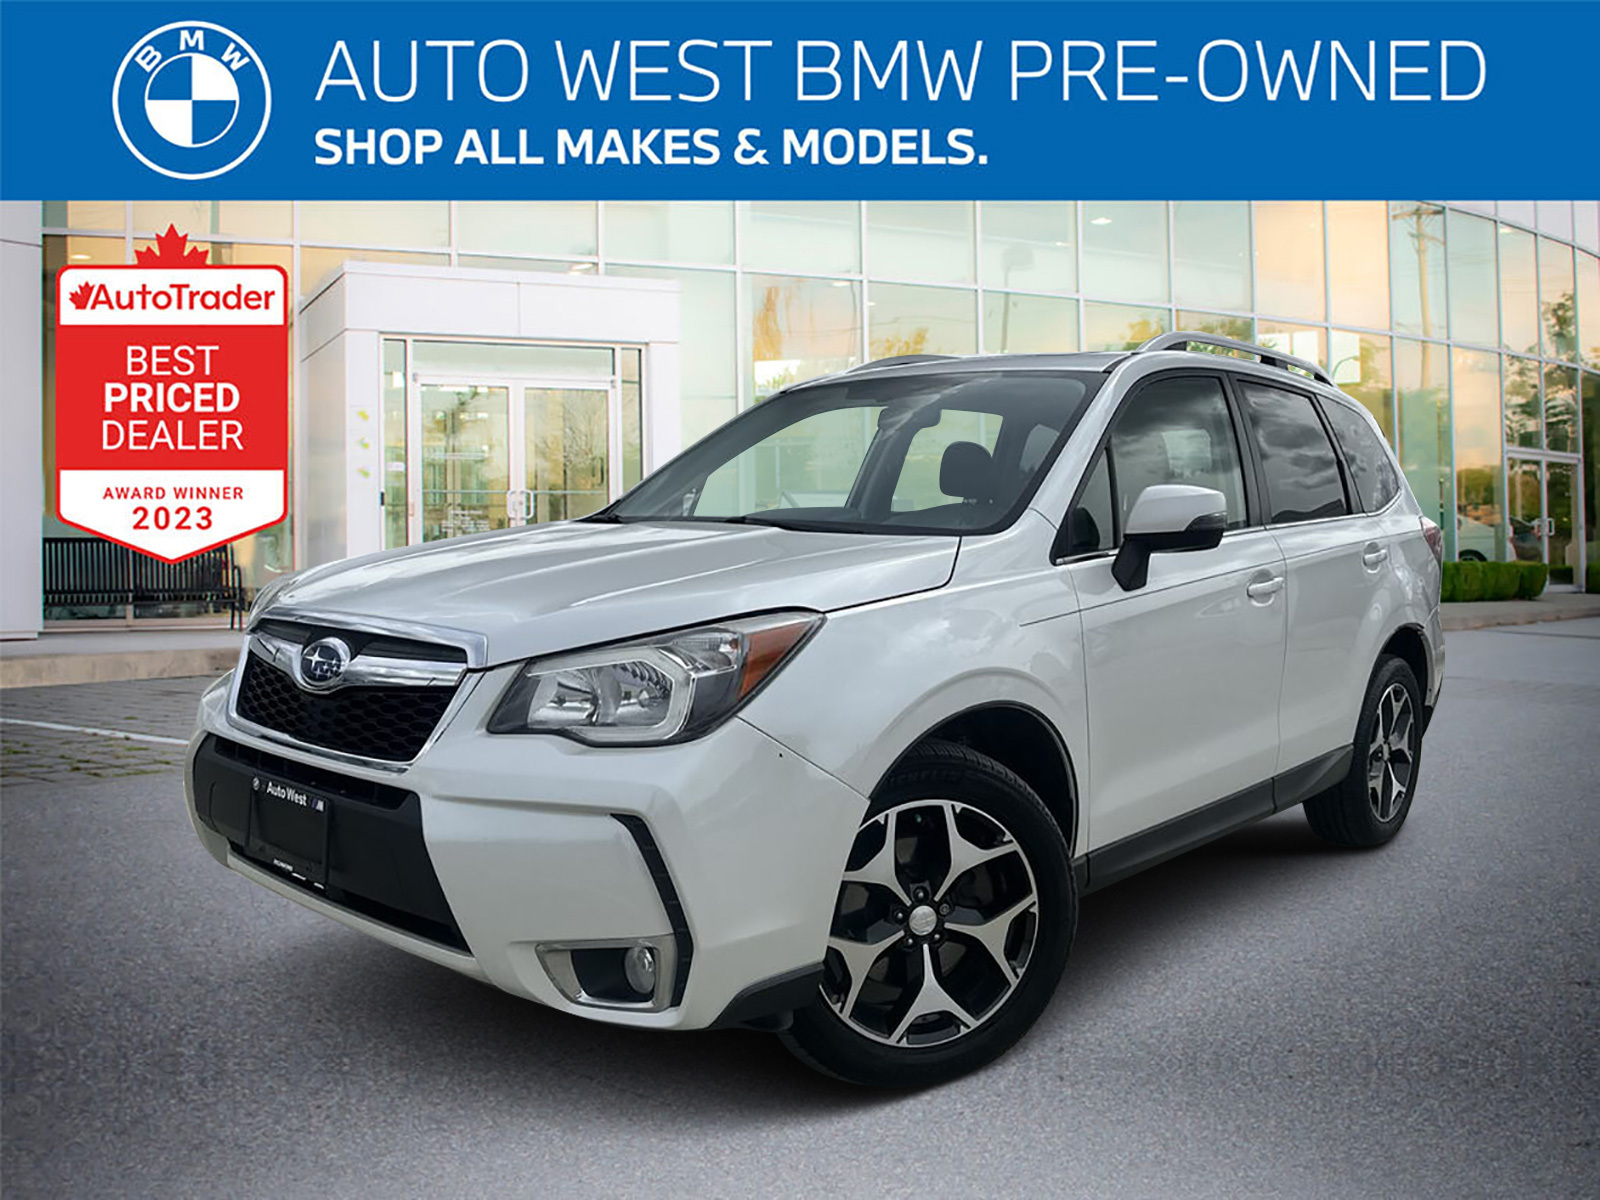 2014 Subaru Forester | 2.0L Turbo | fully reconditioned